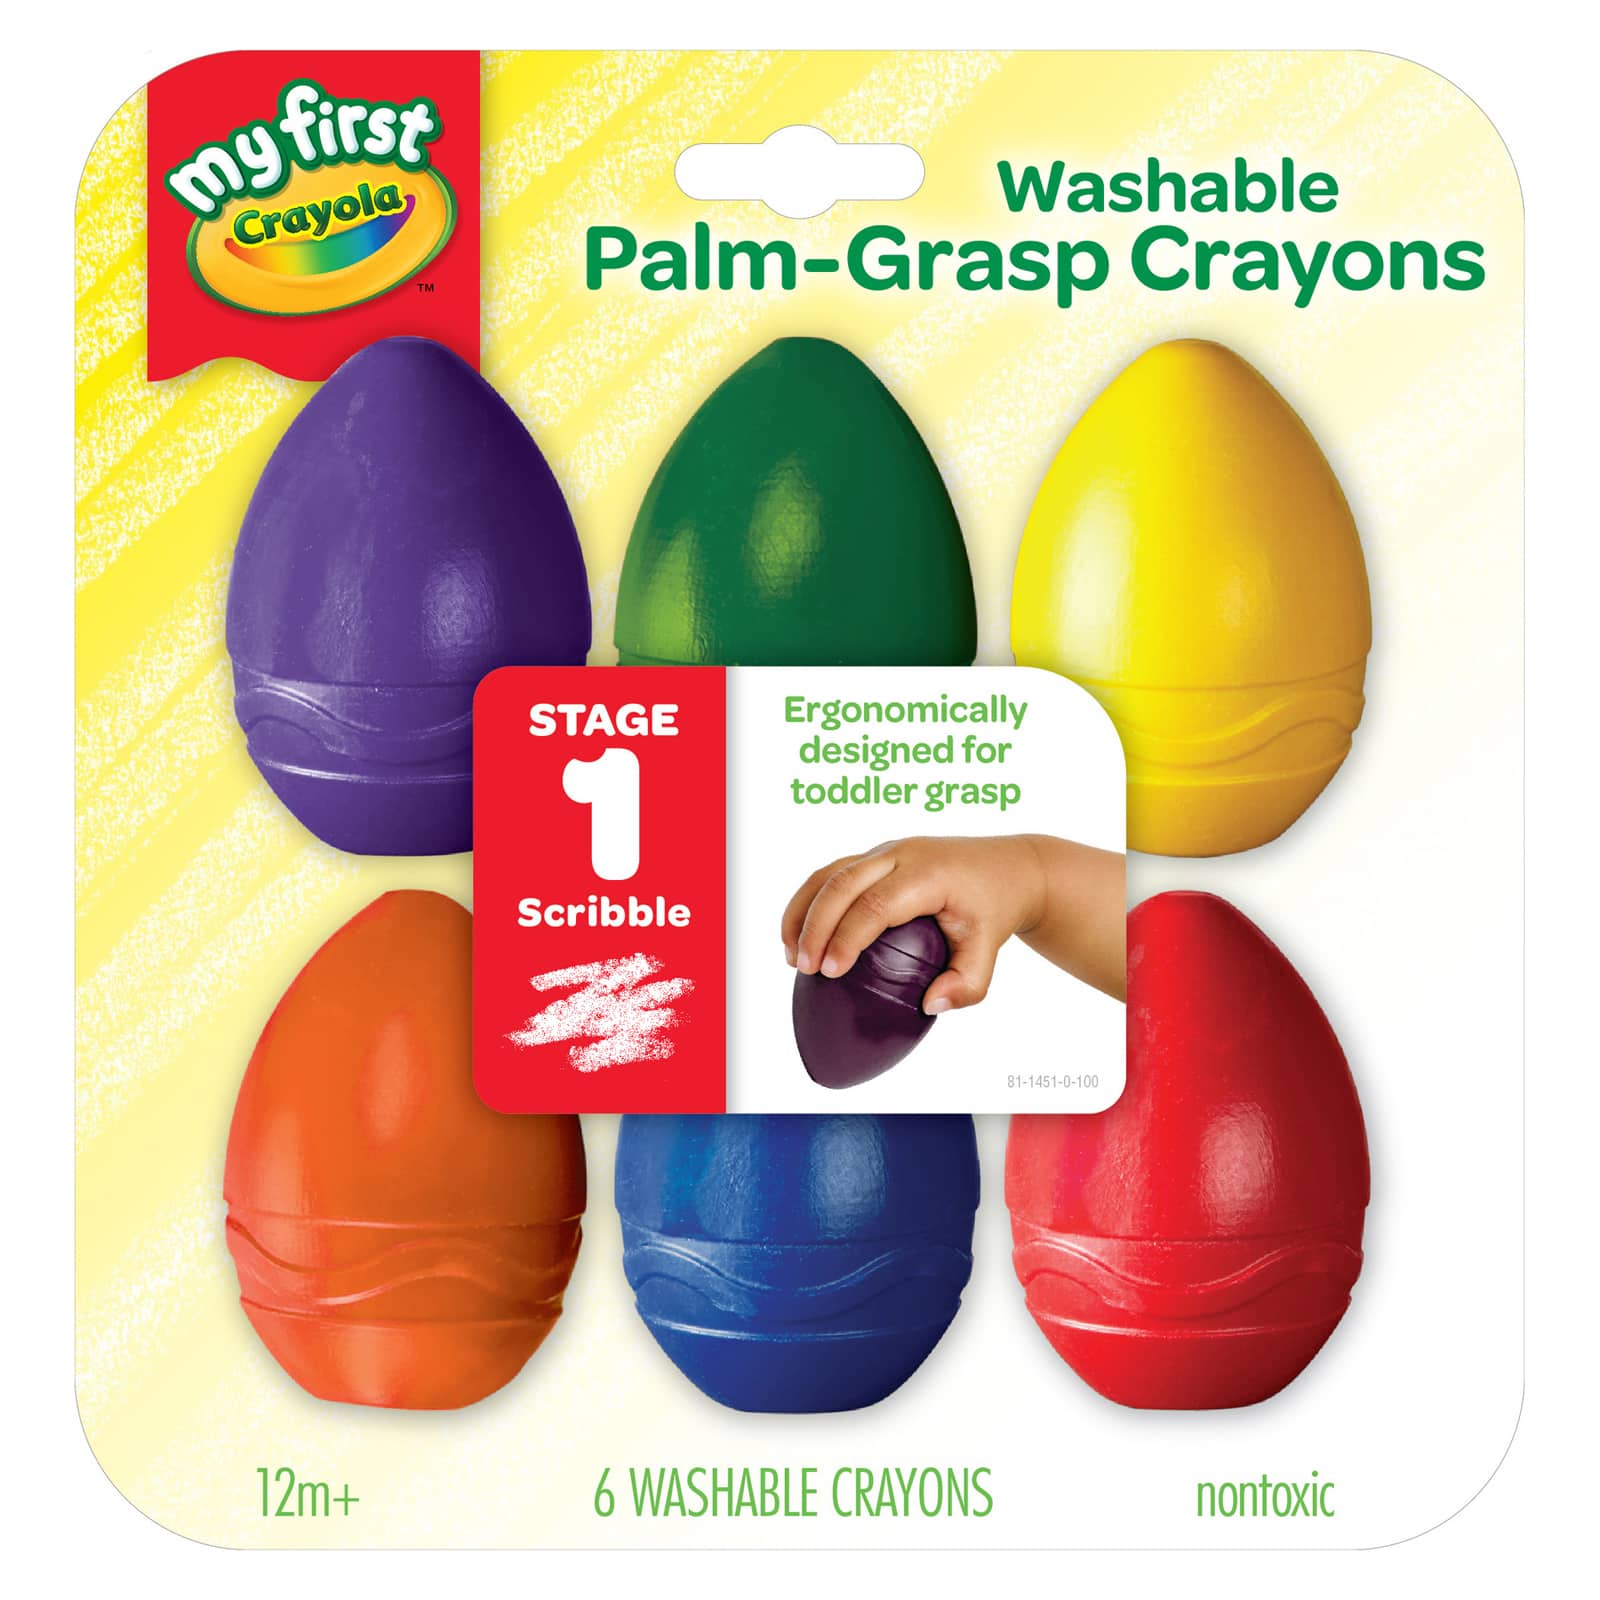  Egg Crayons for Toddlers, 9pcs Palm Grip Baby Crayons